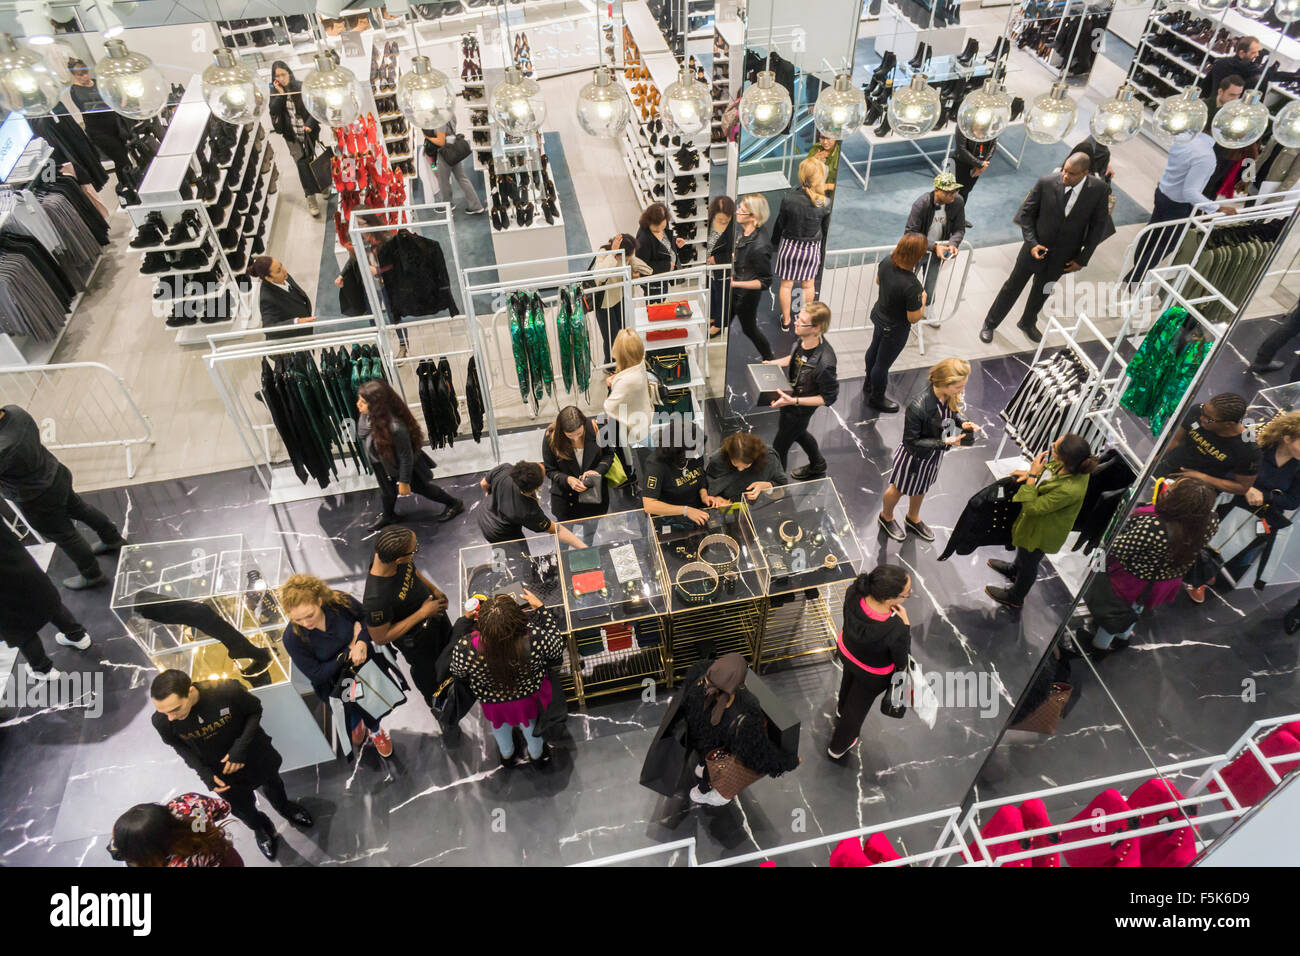 New York, USA. 05th Nov, 2015. Shoppers in the designated Balmain x H&M section of an H&M store in New York on Thursday, November 5, 2015. The collection, designed by the young head of Balmain, Olivier Rousteing, was highly anticipated by fashionistas and drew crowds around the world. In New York H&M instituted a wristband system to time when shoppers could arrive to control crowds. Credit:  Richard Levine/Alamy Live News Stock Photo